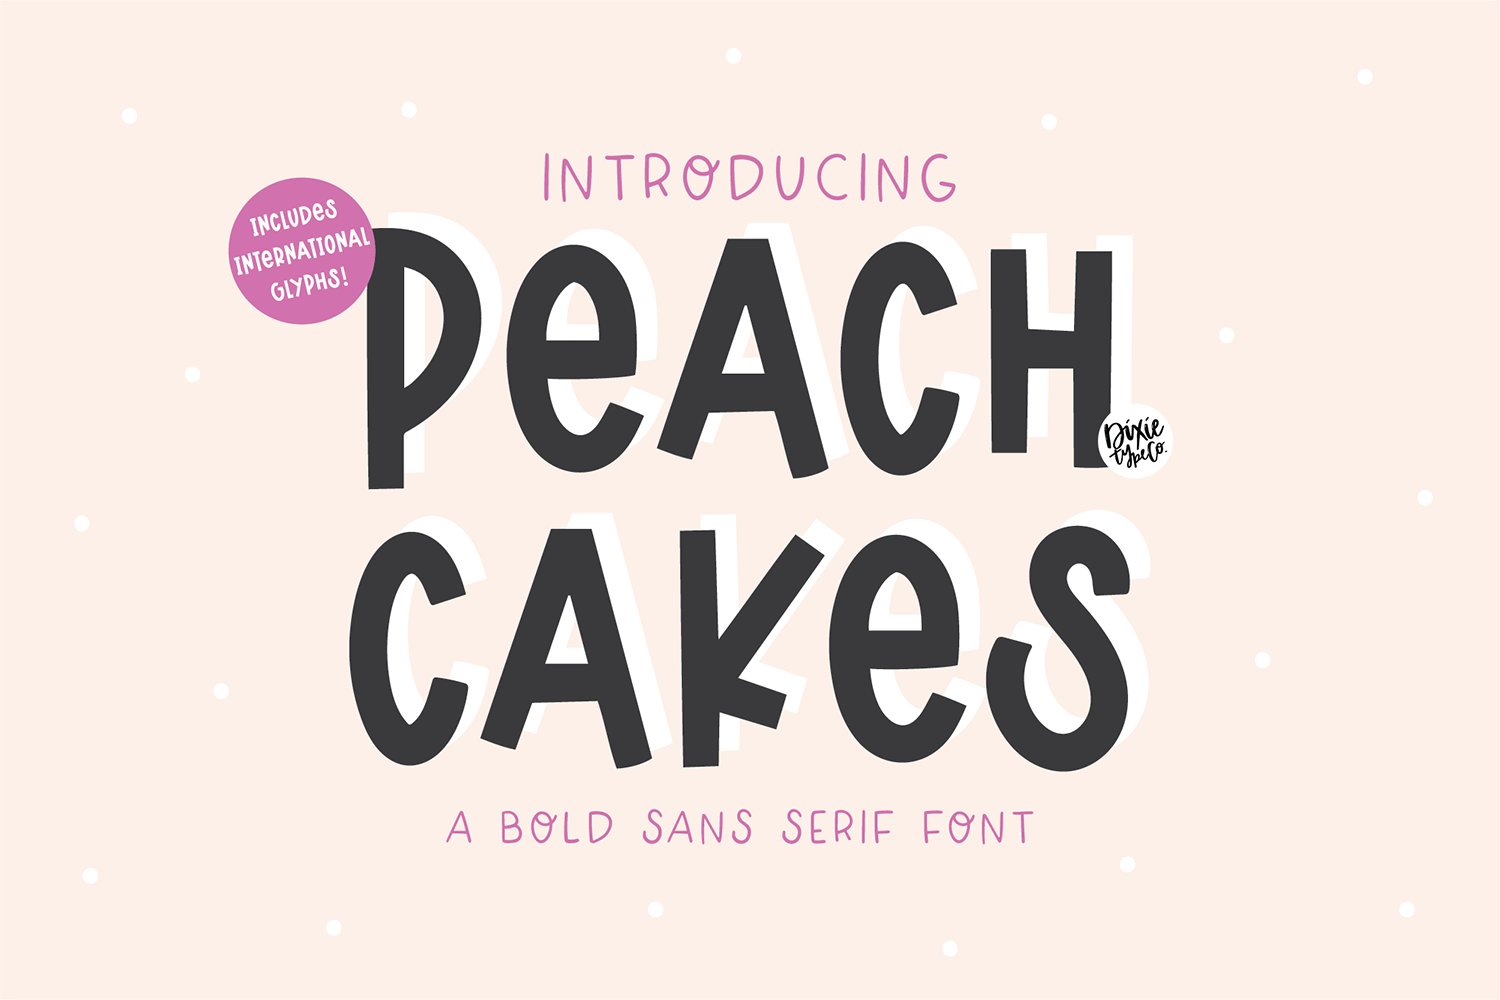 PEACH CAKES Chunky Display Font cover image.